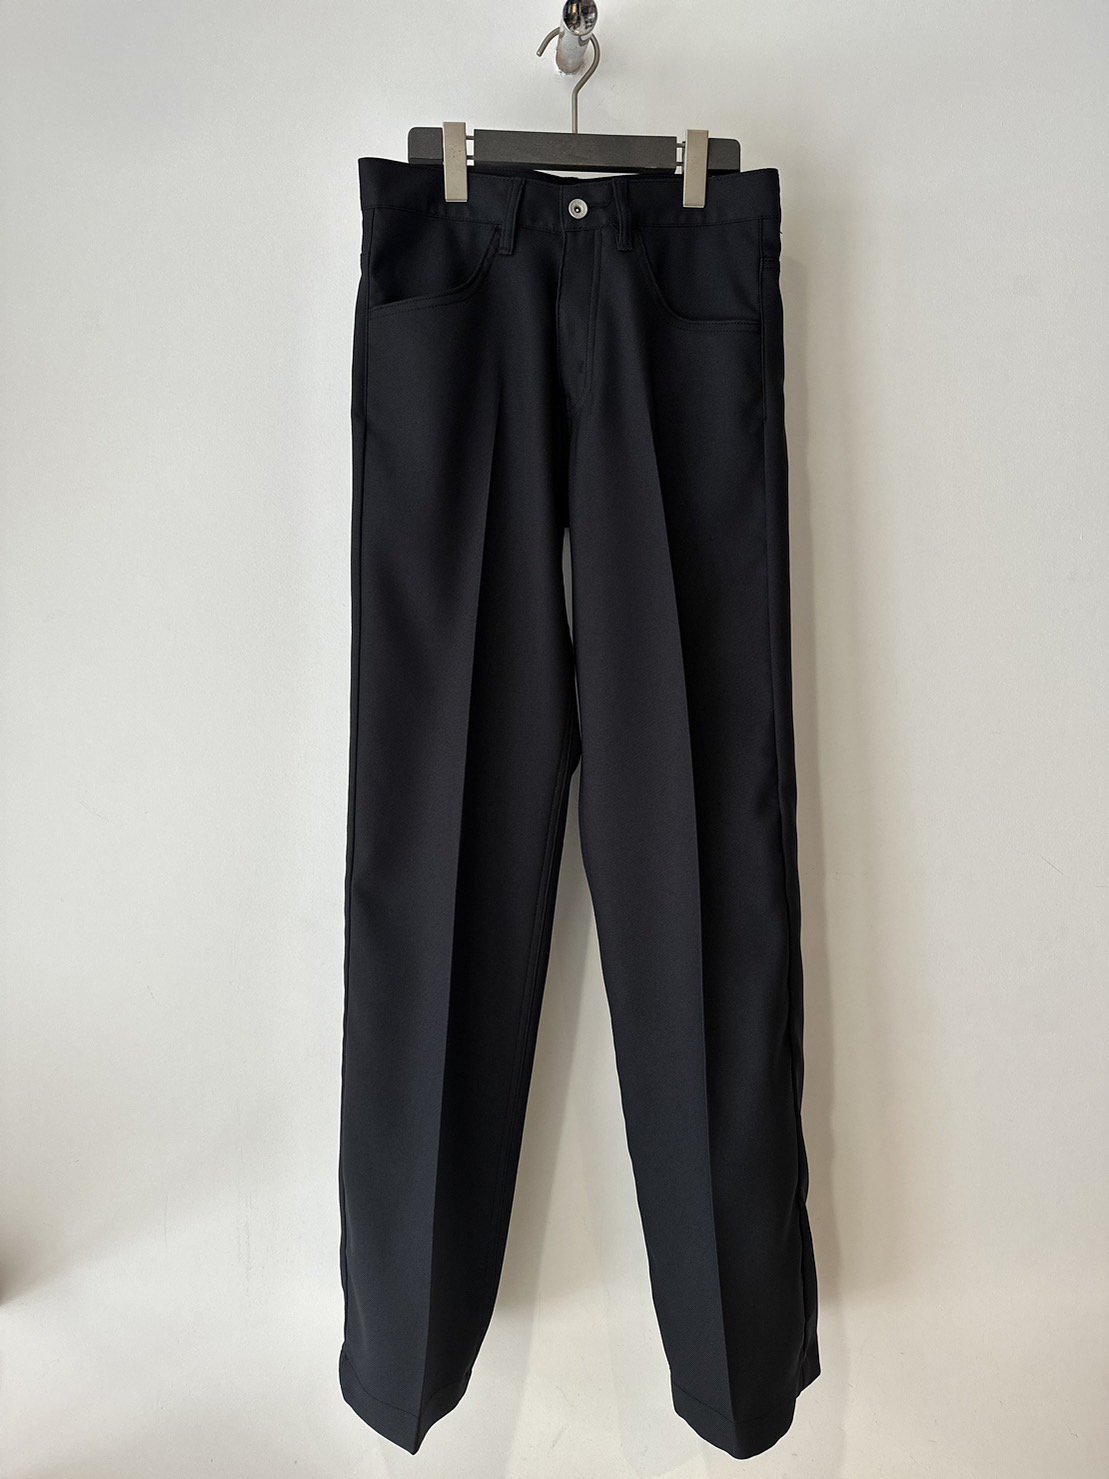 DAIRIKU<br />Straight Pressed Pants / Black<img class='new_mark_img2' src='https://img.shop-pro.jp/img/new/icons14.gif' style='border:none;display:inline;margin:0px;padding:0px;width:auto;' />